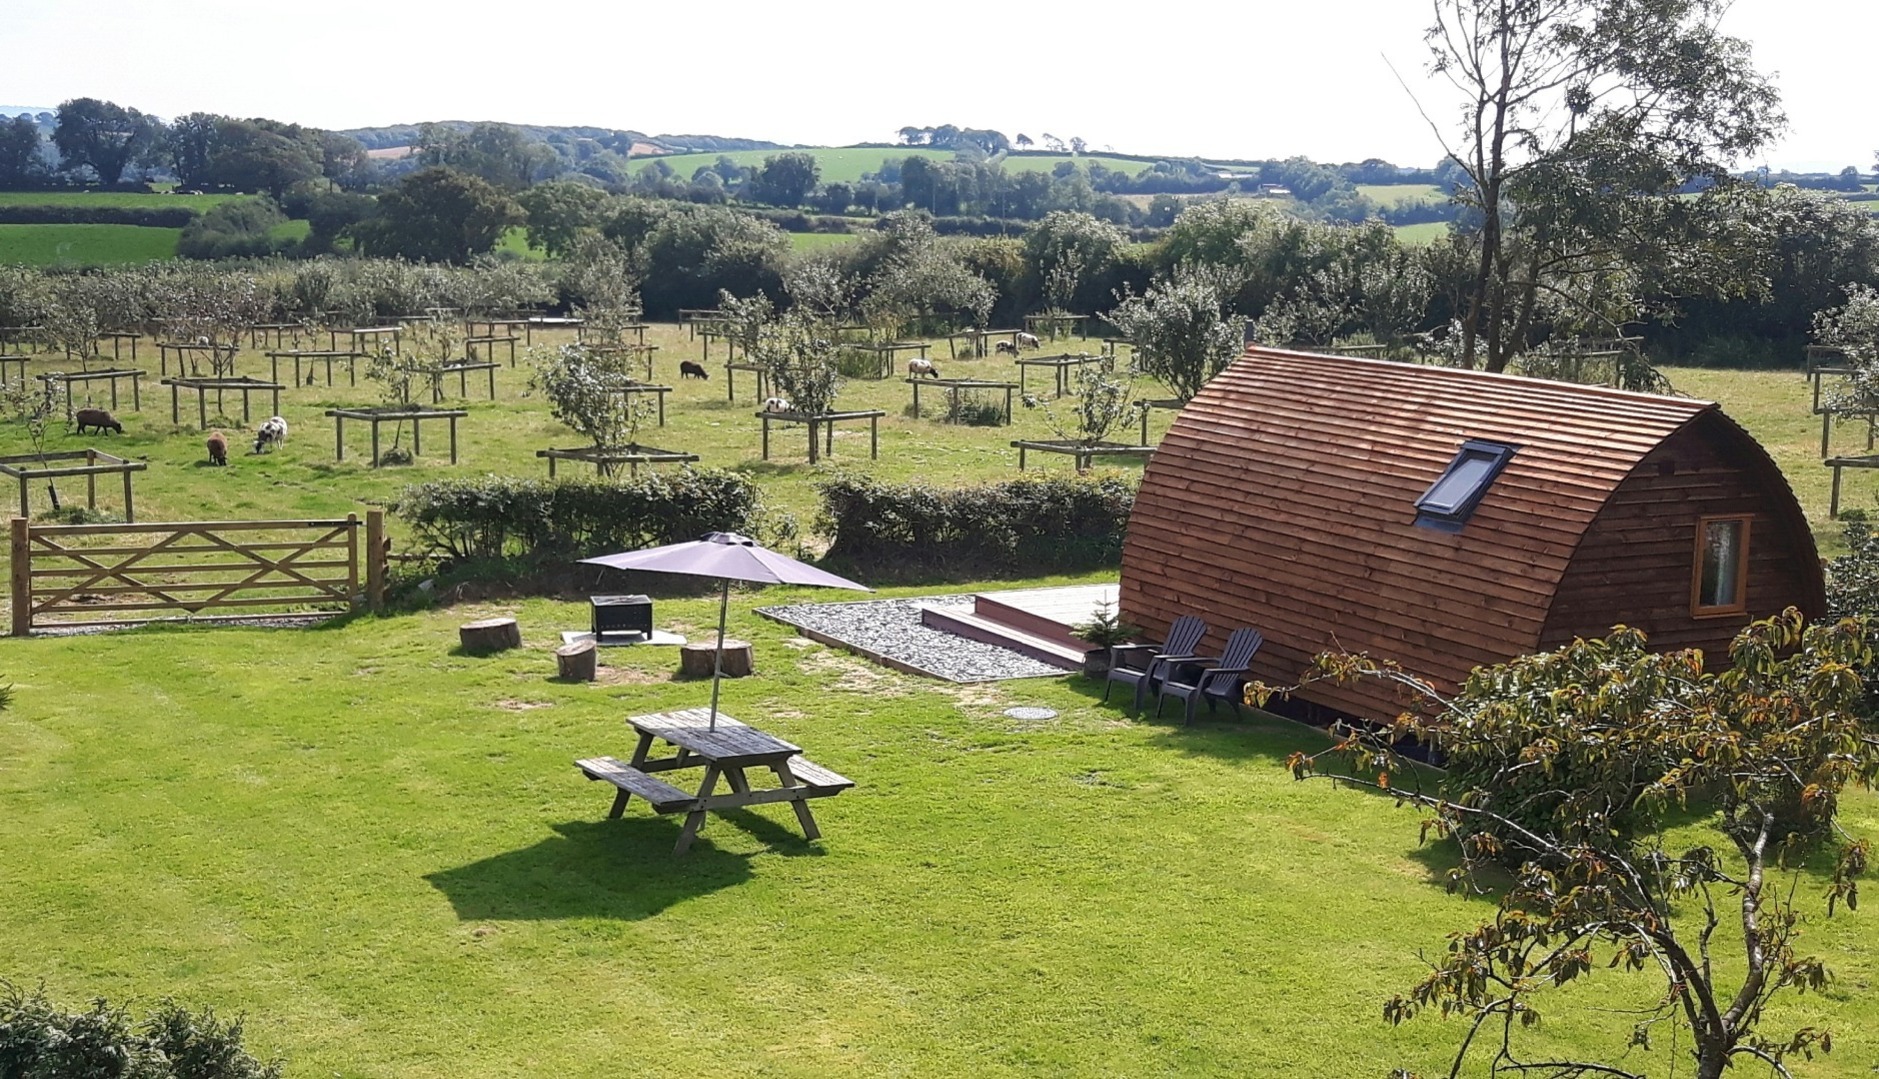 Glamping holiday accommodation and surrounding area